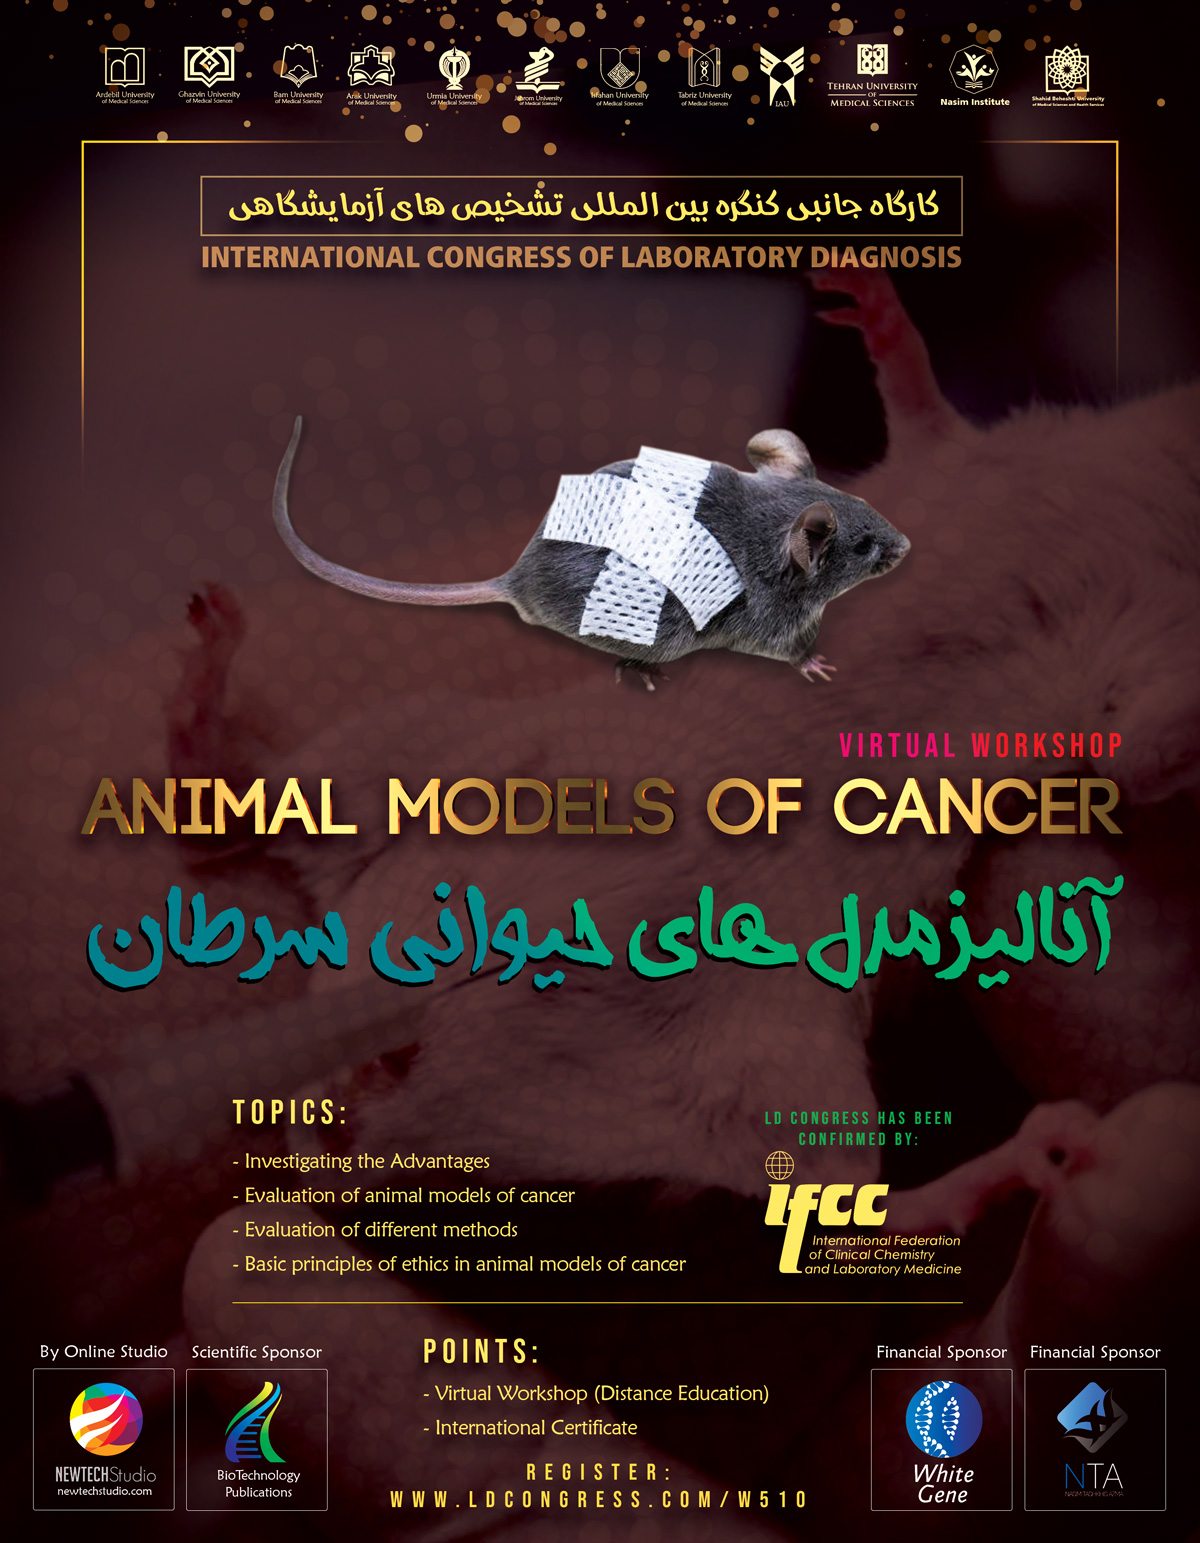 Principles of creating and analyzing animal models of cancer